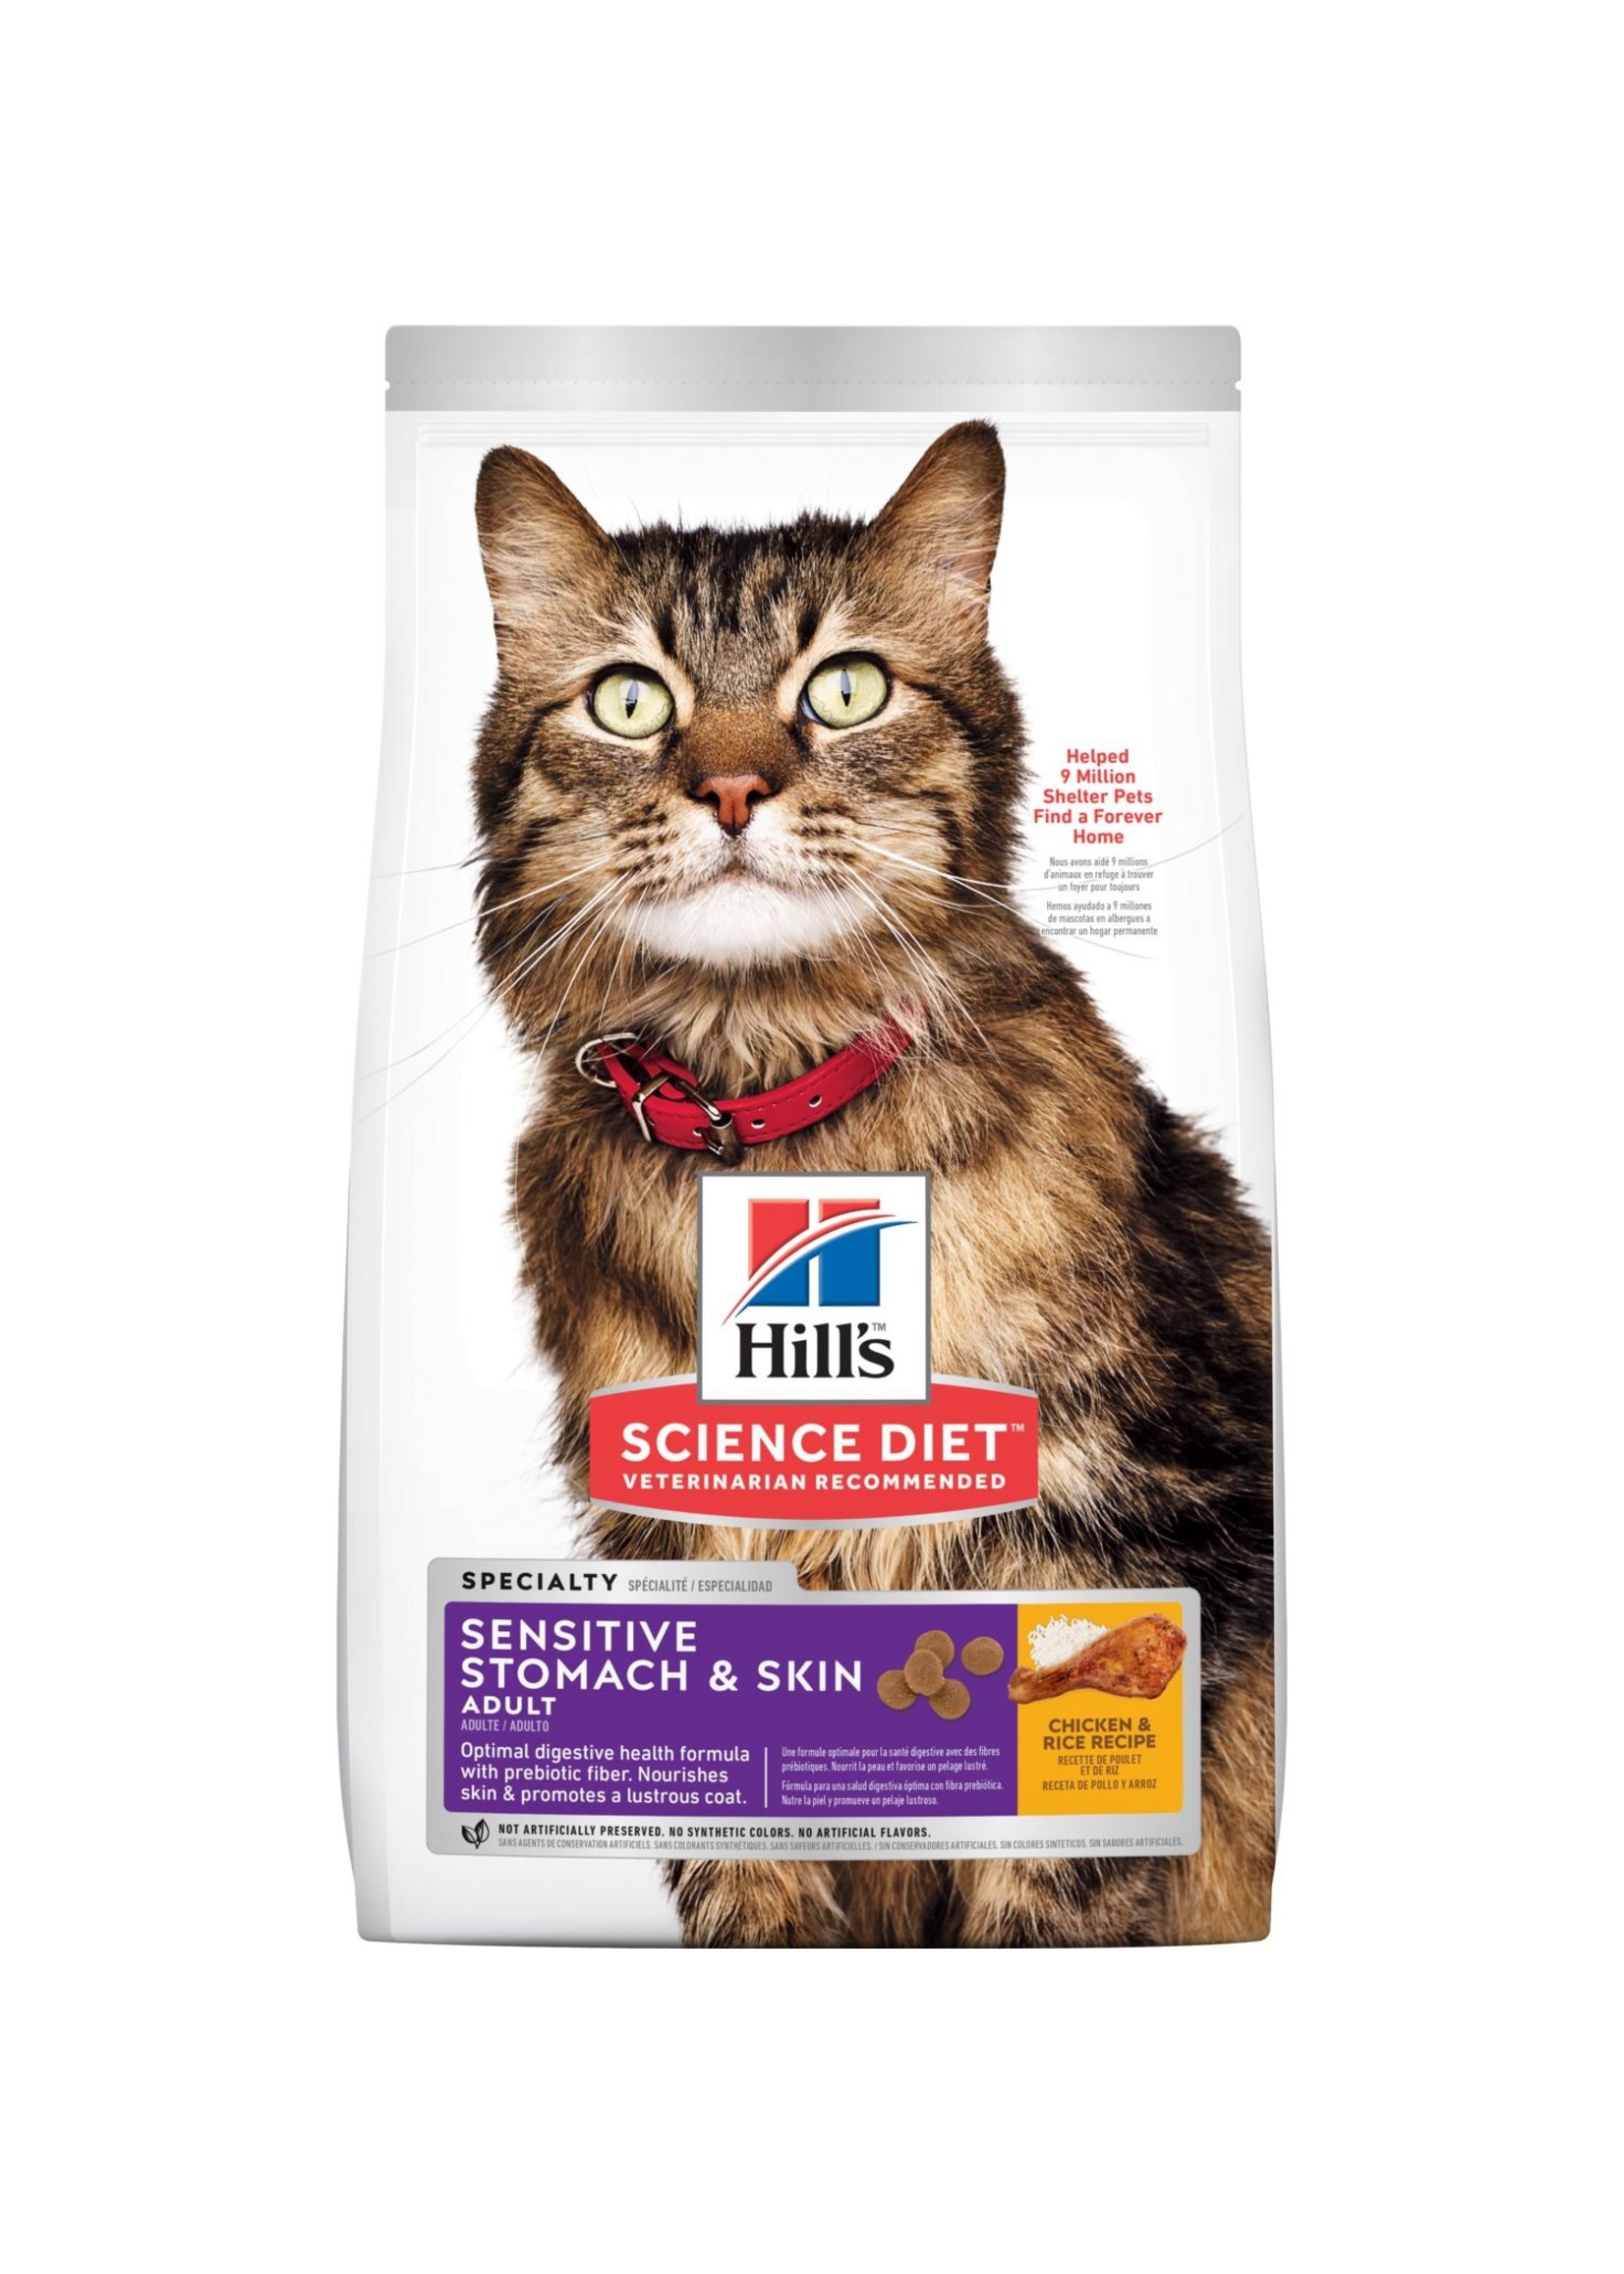 Hill's Science Diet Hill's Science Diet Adult Sensitive Stomach & Skin Cat Food